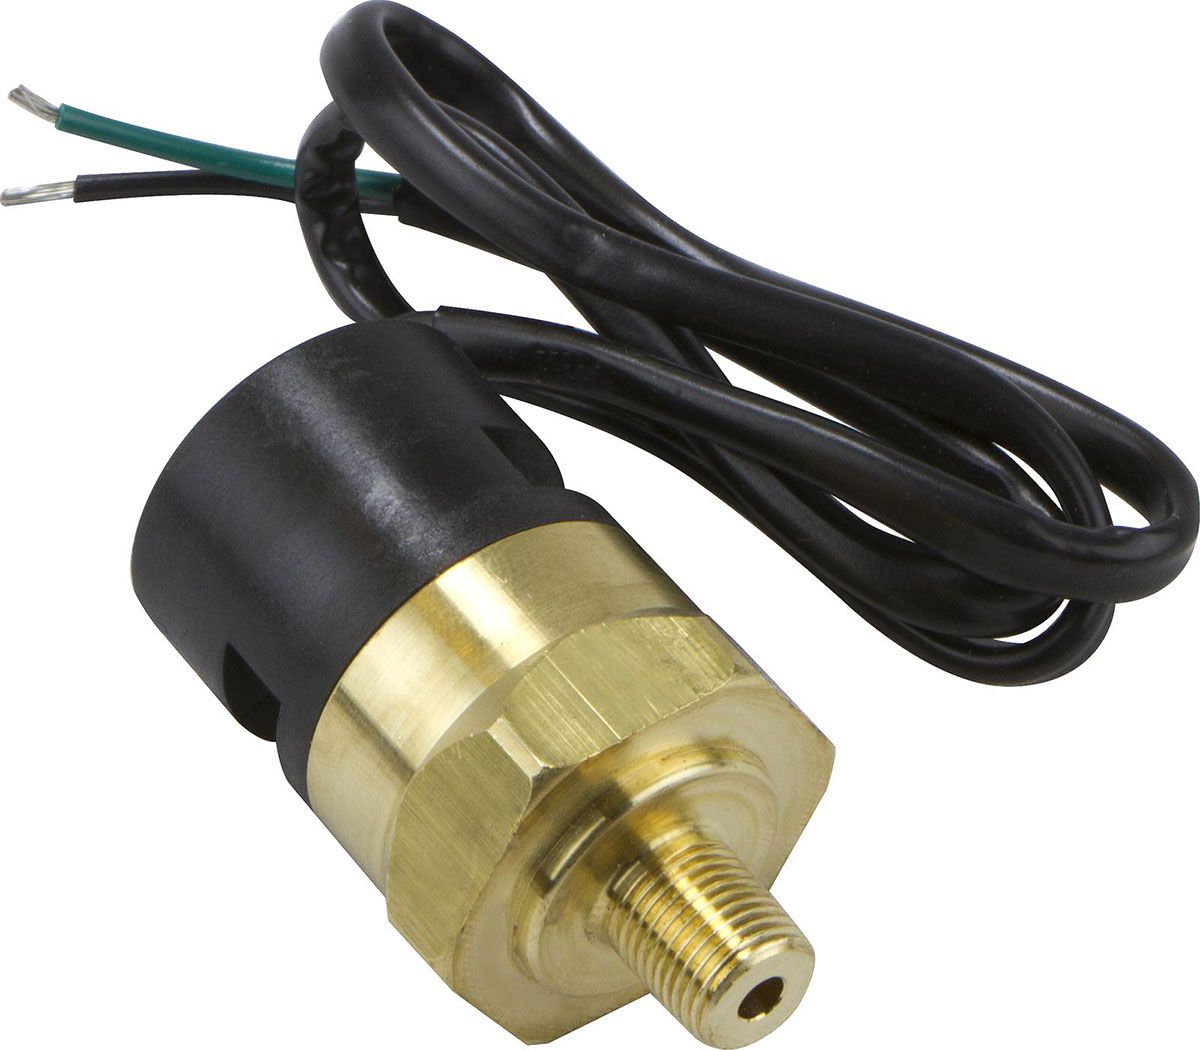 CVRVS-25 - REPLACEMENT H/DUTY VAC SWITCH